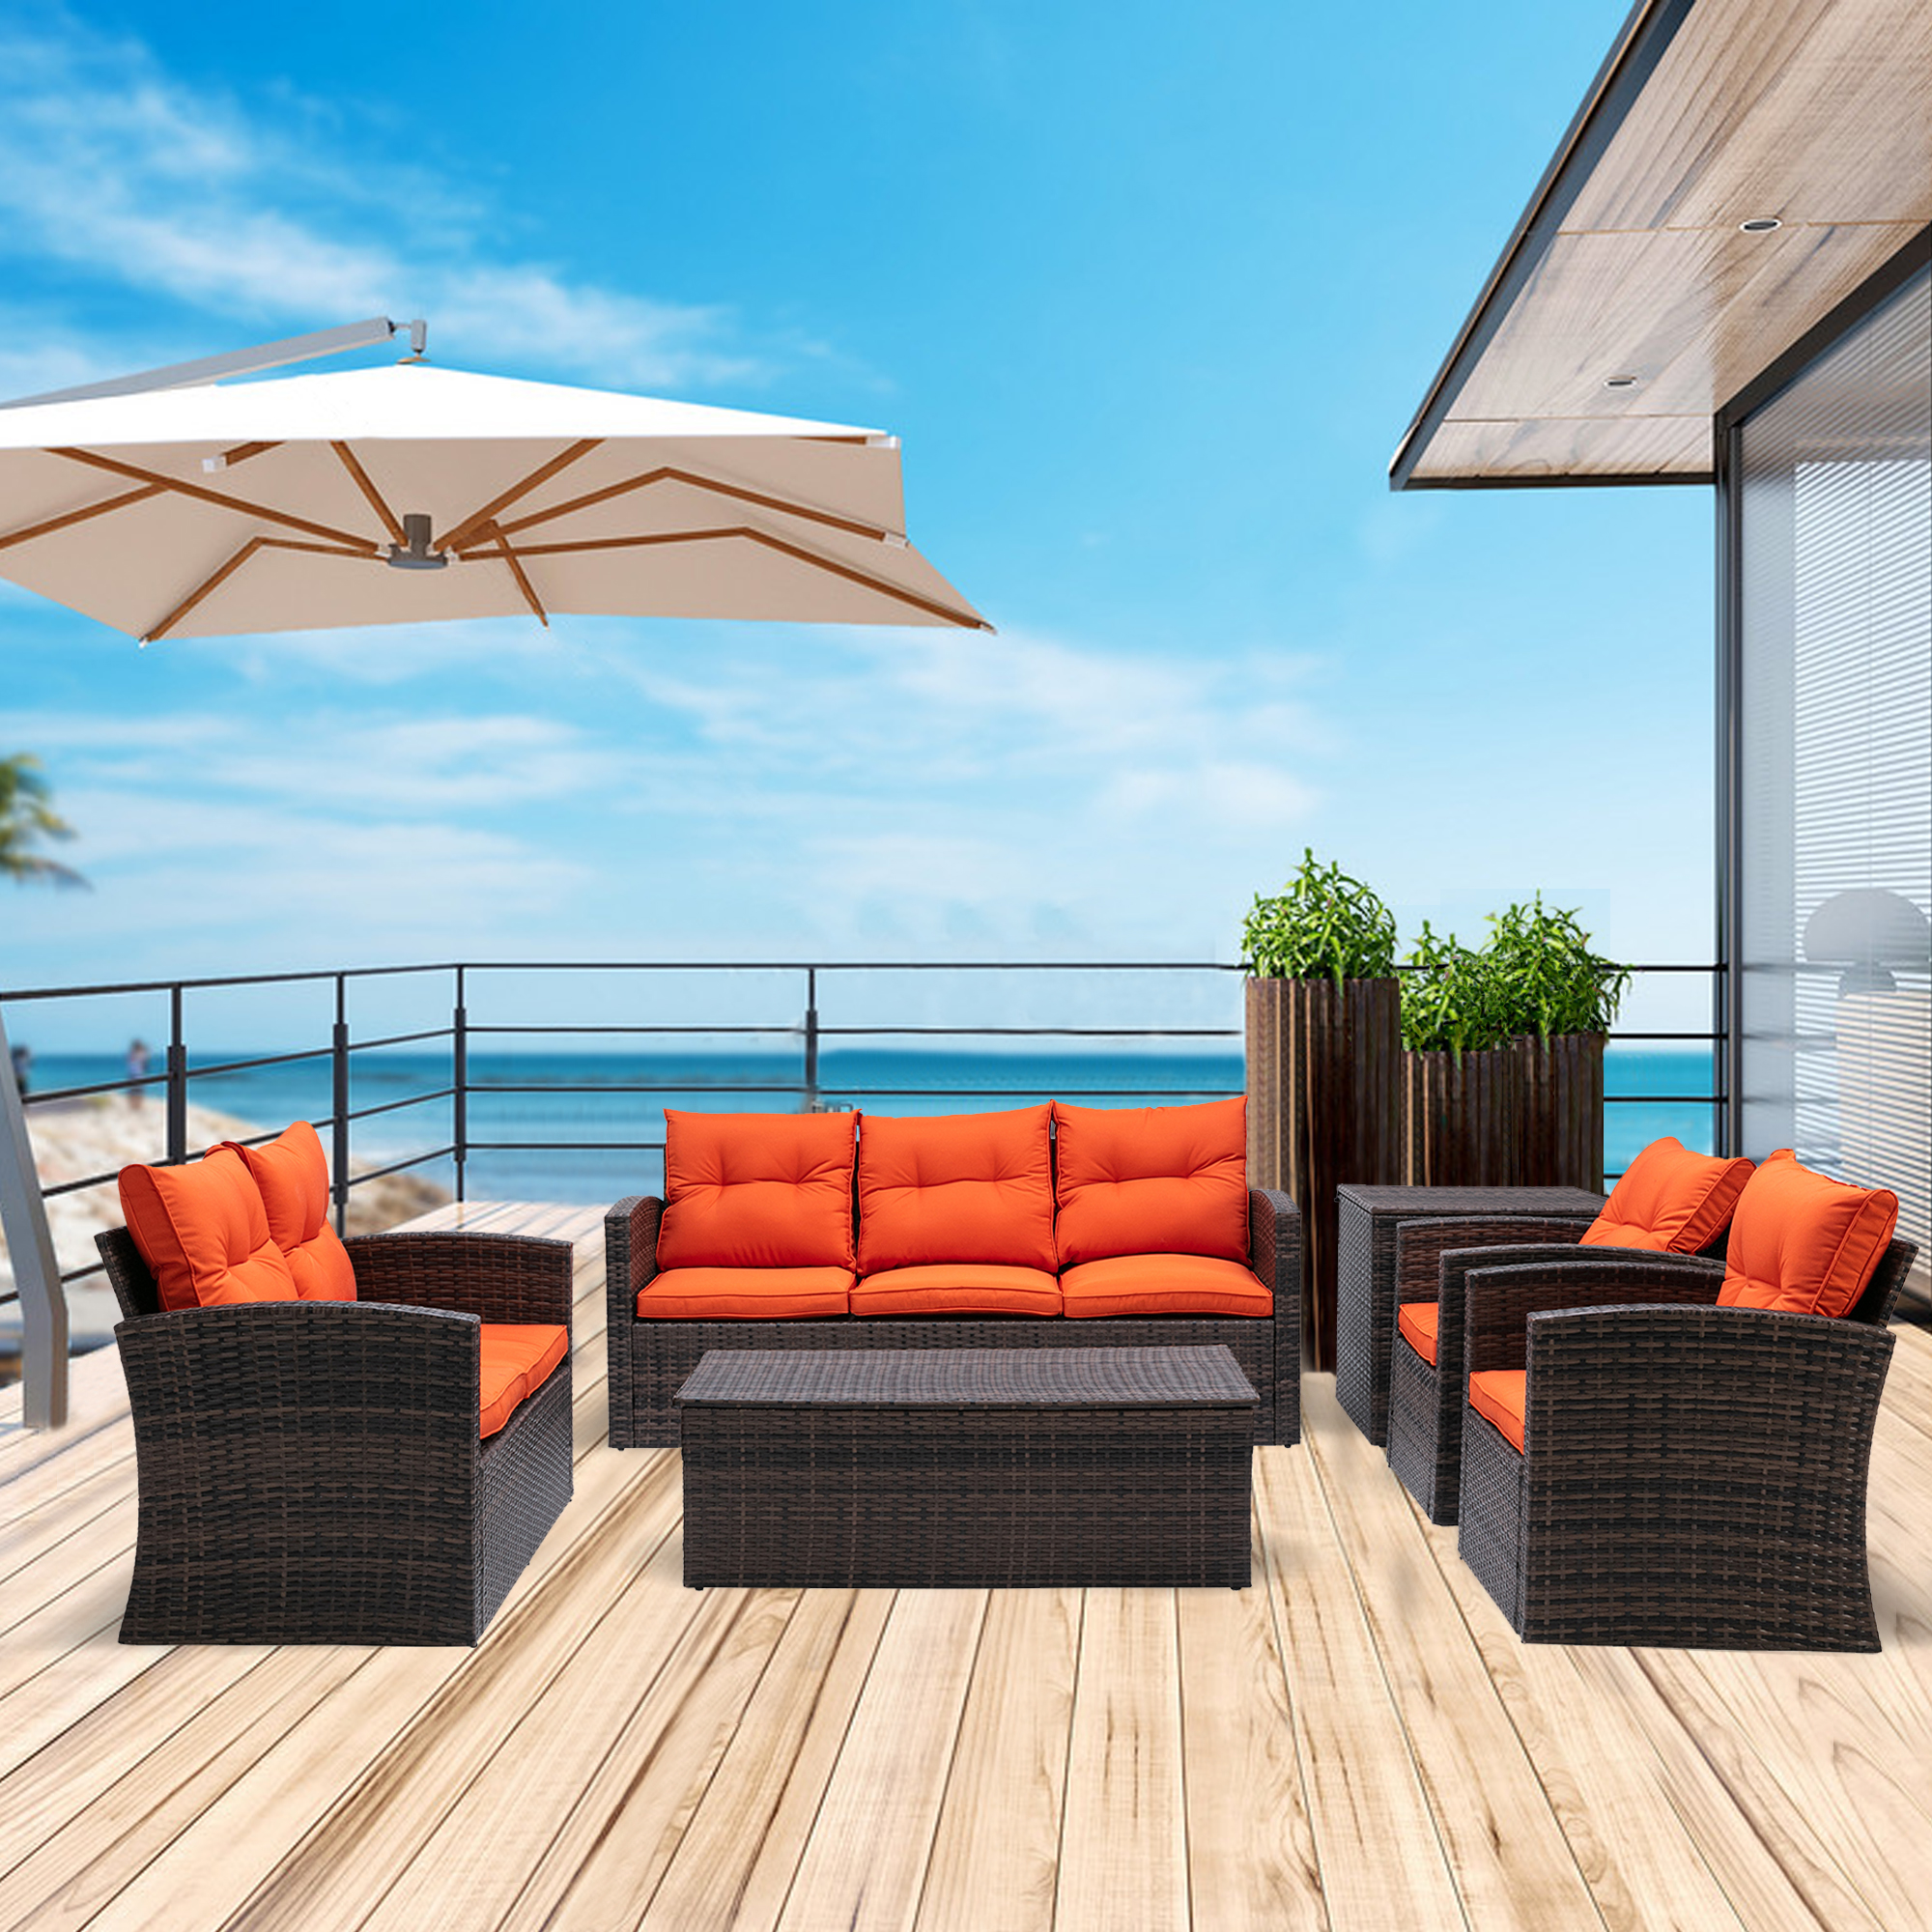 6 PCS Rattan Sectional Set and Table with Storage in Brown, Orange Cushions-Boyel Living